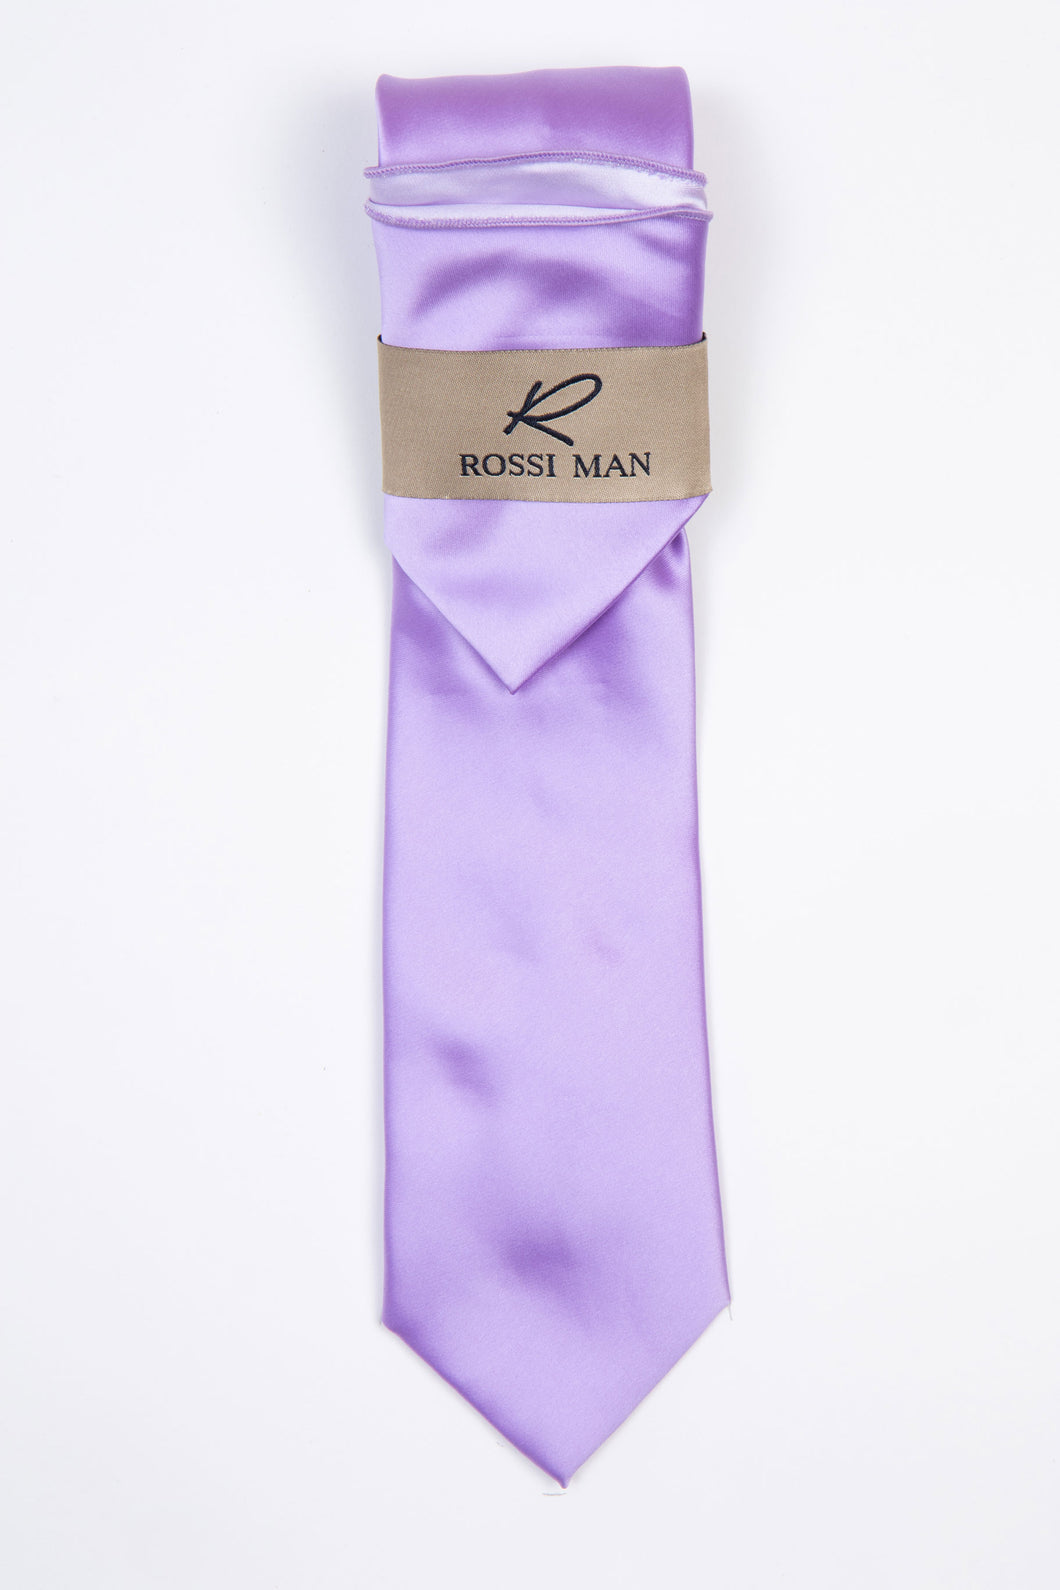 Rossi Man Tie and Pocket Round - RMR665-13